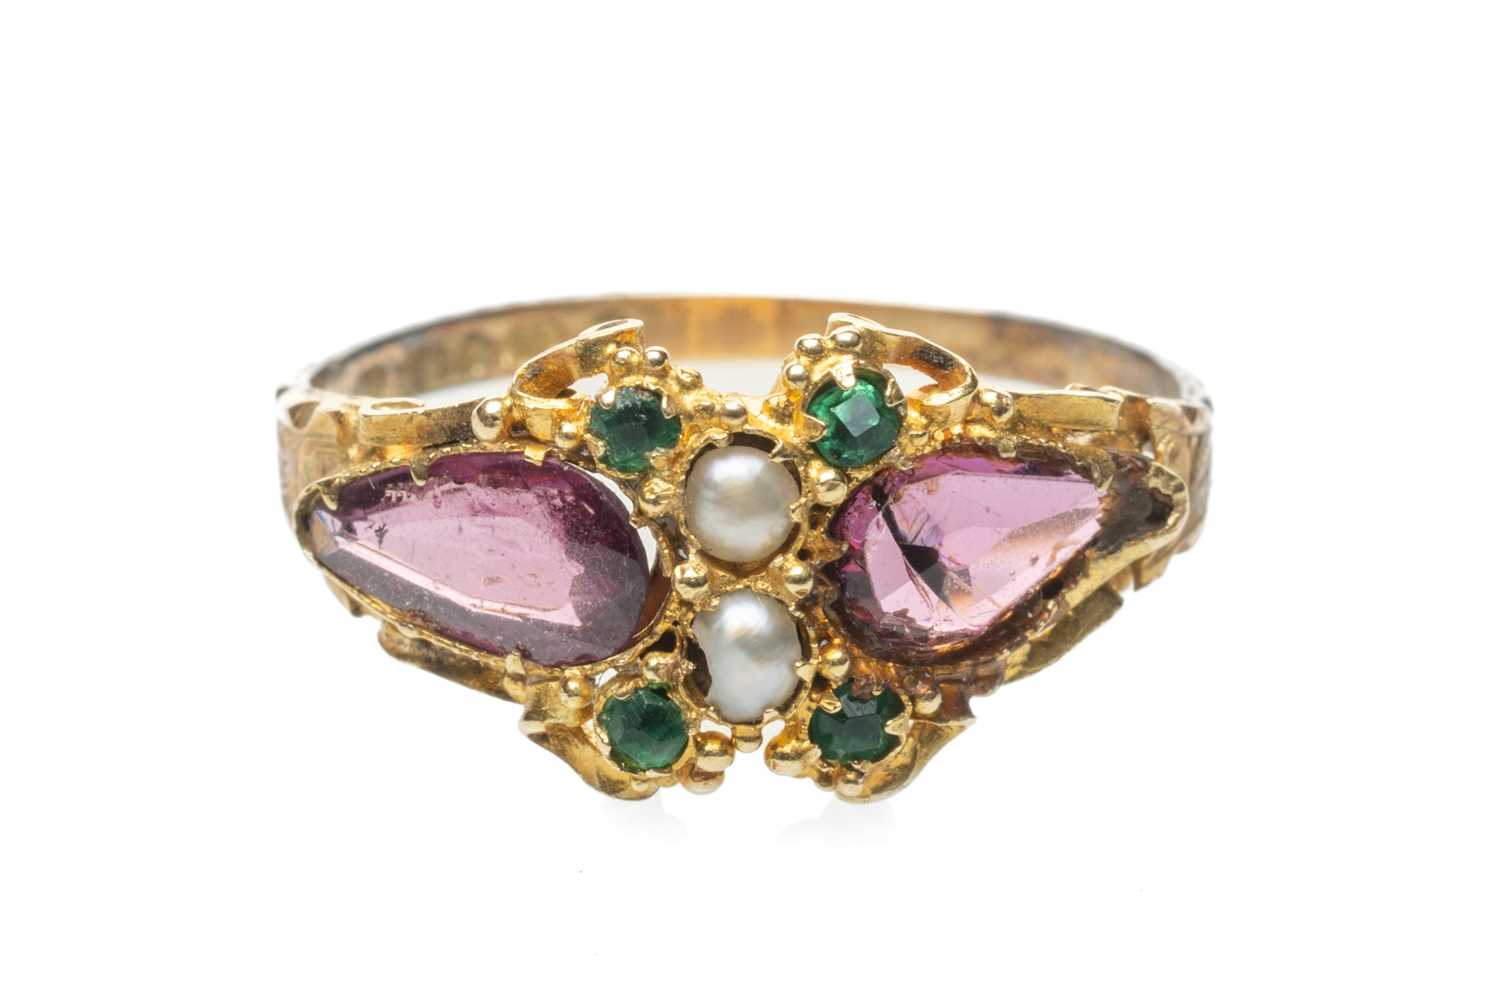 ANTIQUE 15CT GOLD 'SUFFRAGETTE' RING, ring size K 1/2, 1.7gms Provenance: private collection